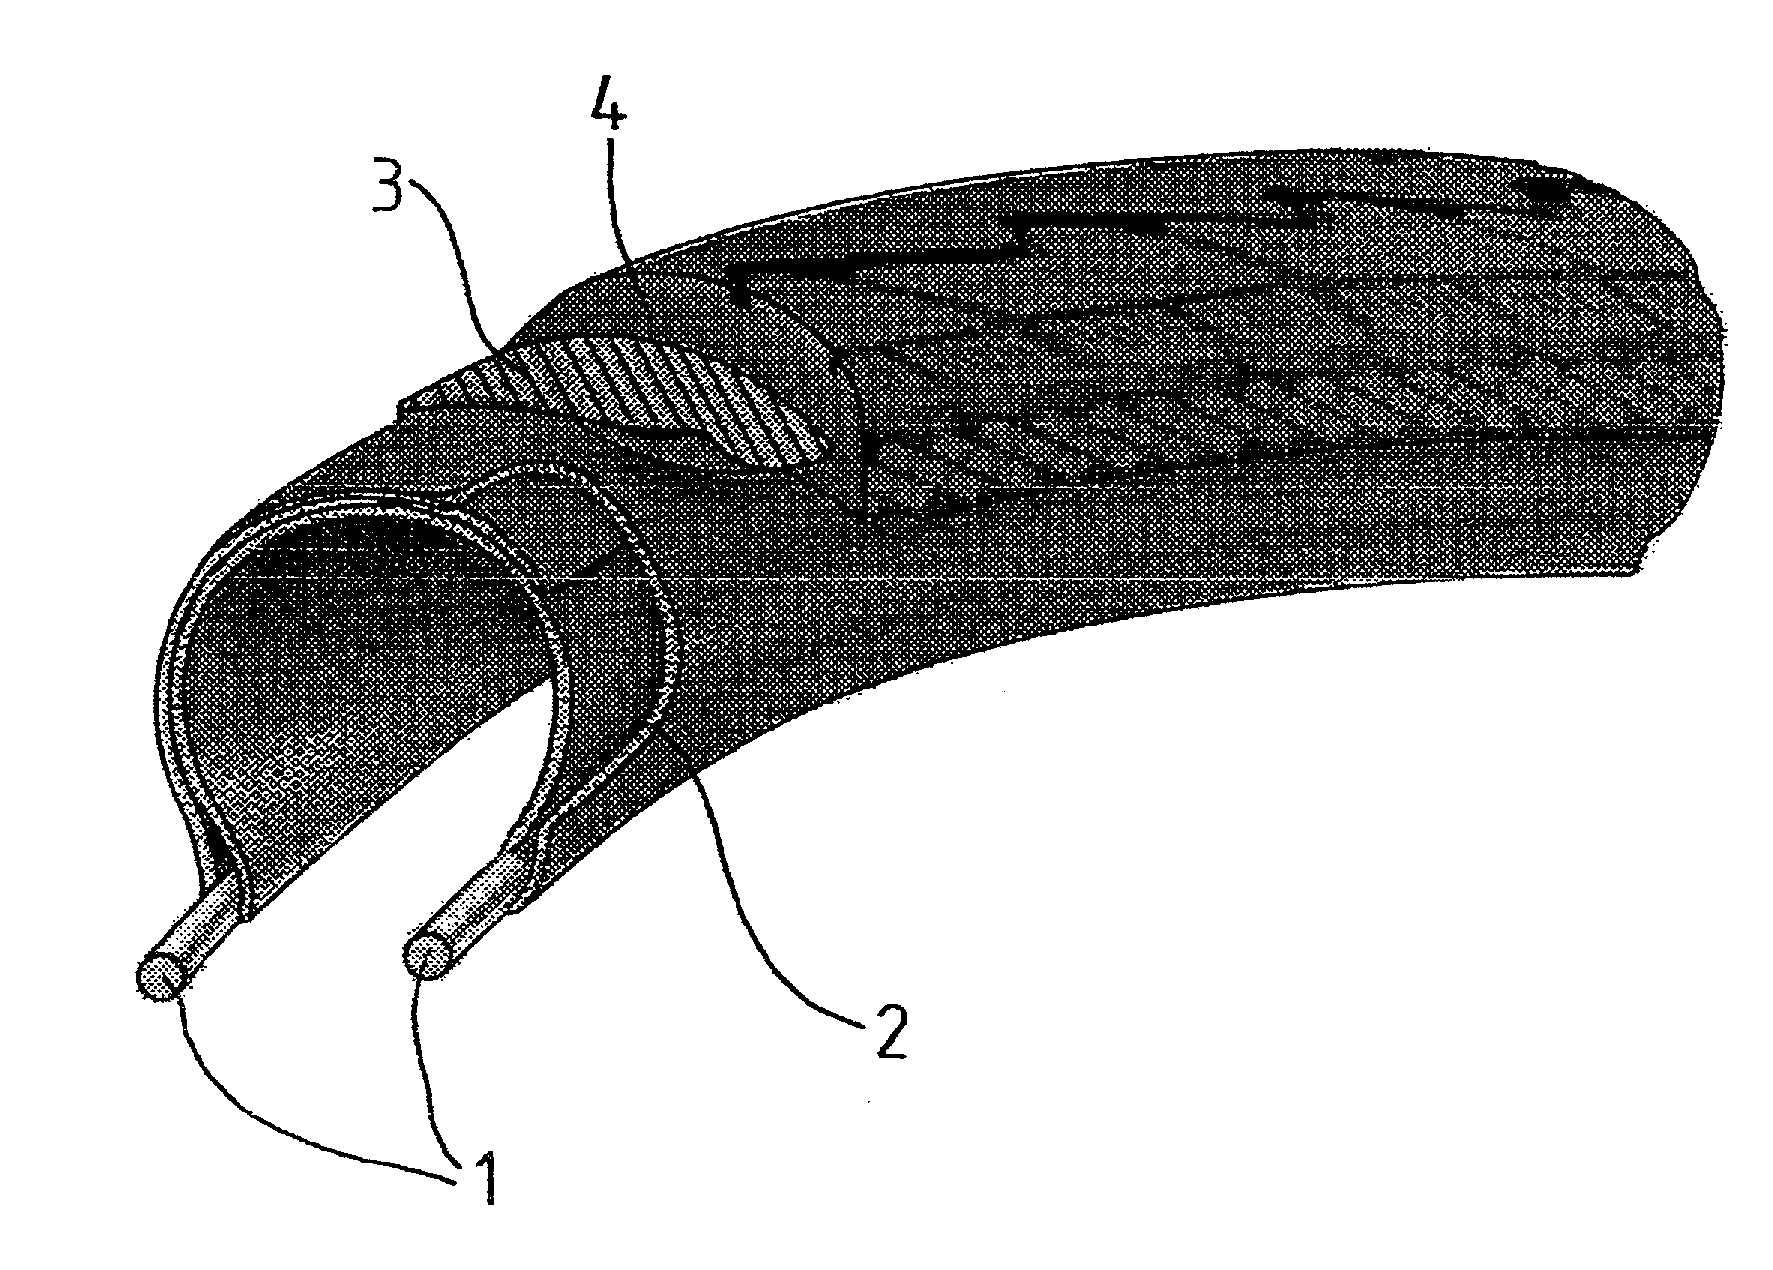 Bicycle tire with reinforcement layer